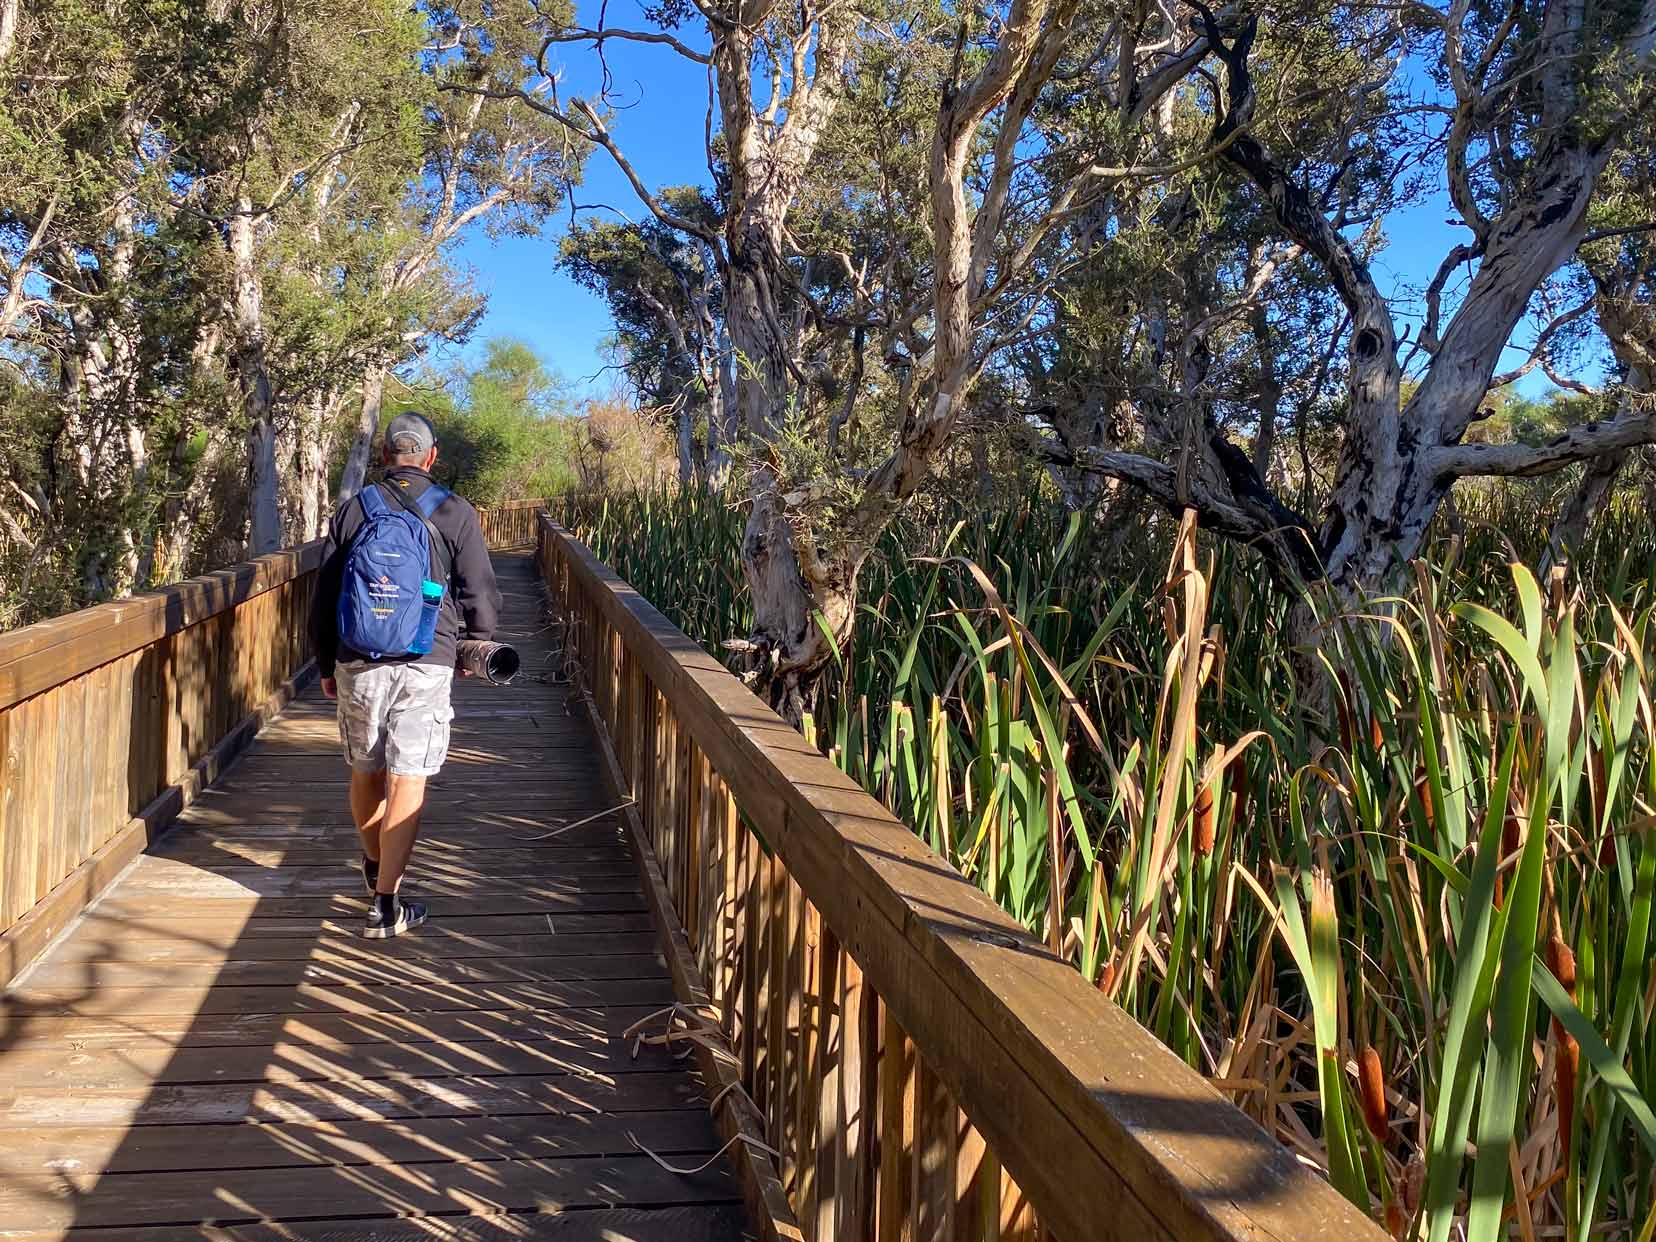 Lars Walking on a boardwalk in Lake Monjuingup with reeds growing high on one side and trees on the other 